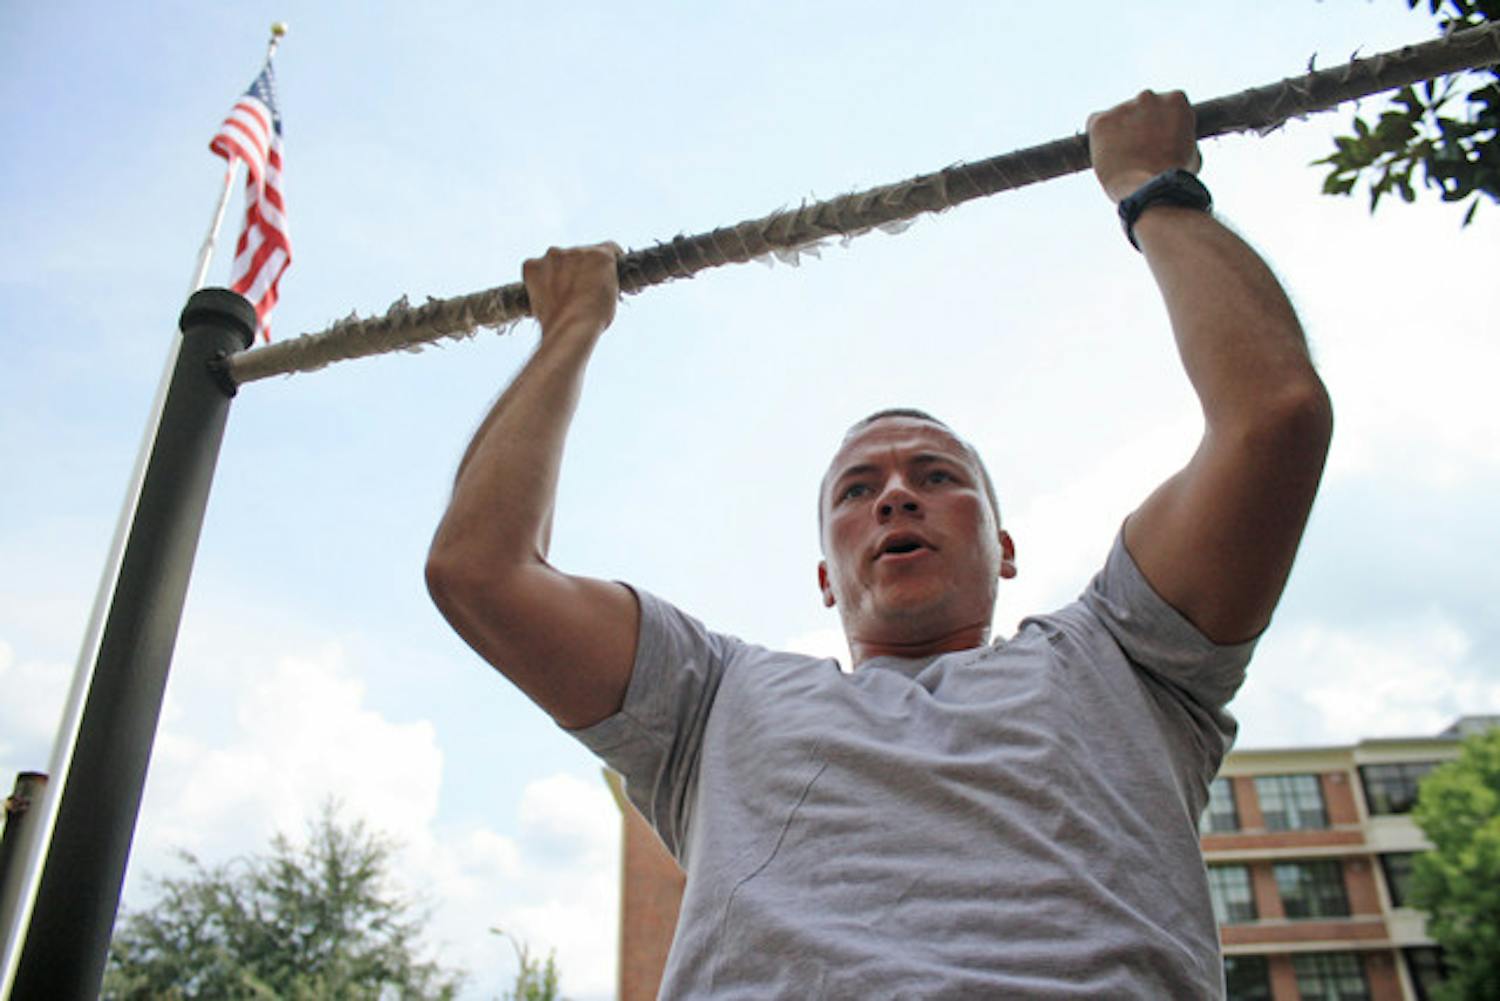 Air Force ROTC member Brandon Feldman does pull-ups before Physical Training. He is a member of the Air Force ROTC Detachment 150.